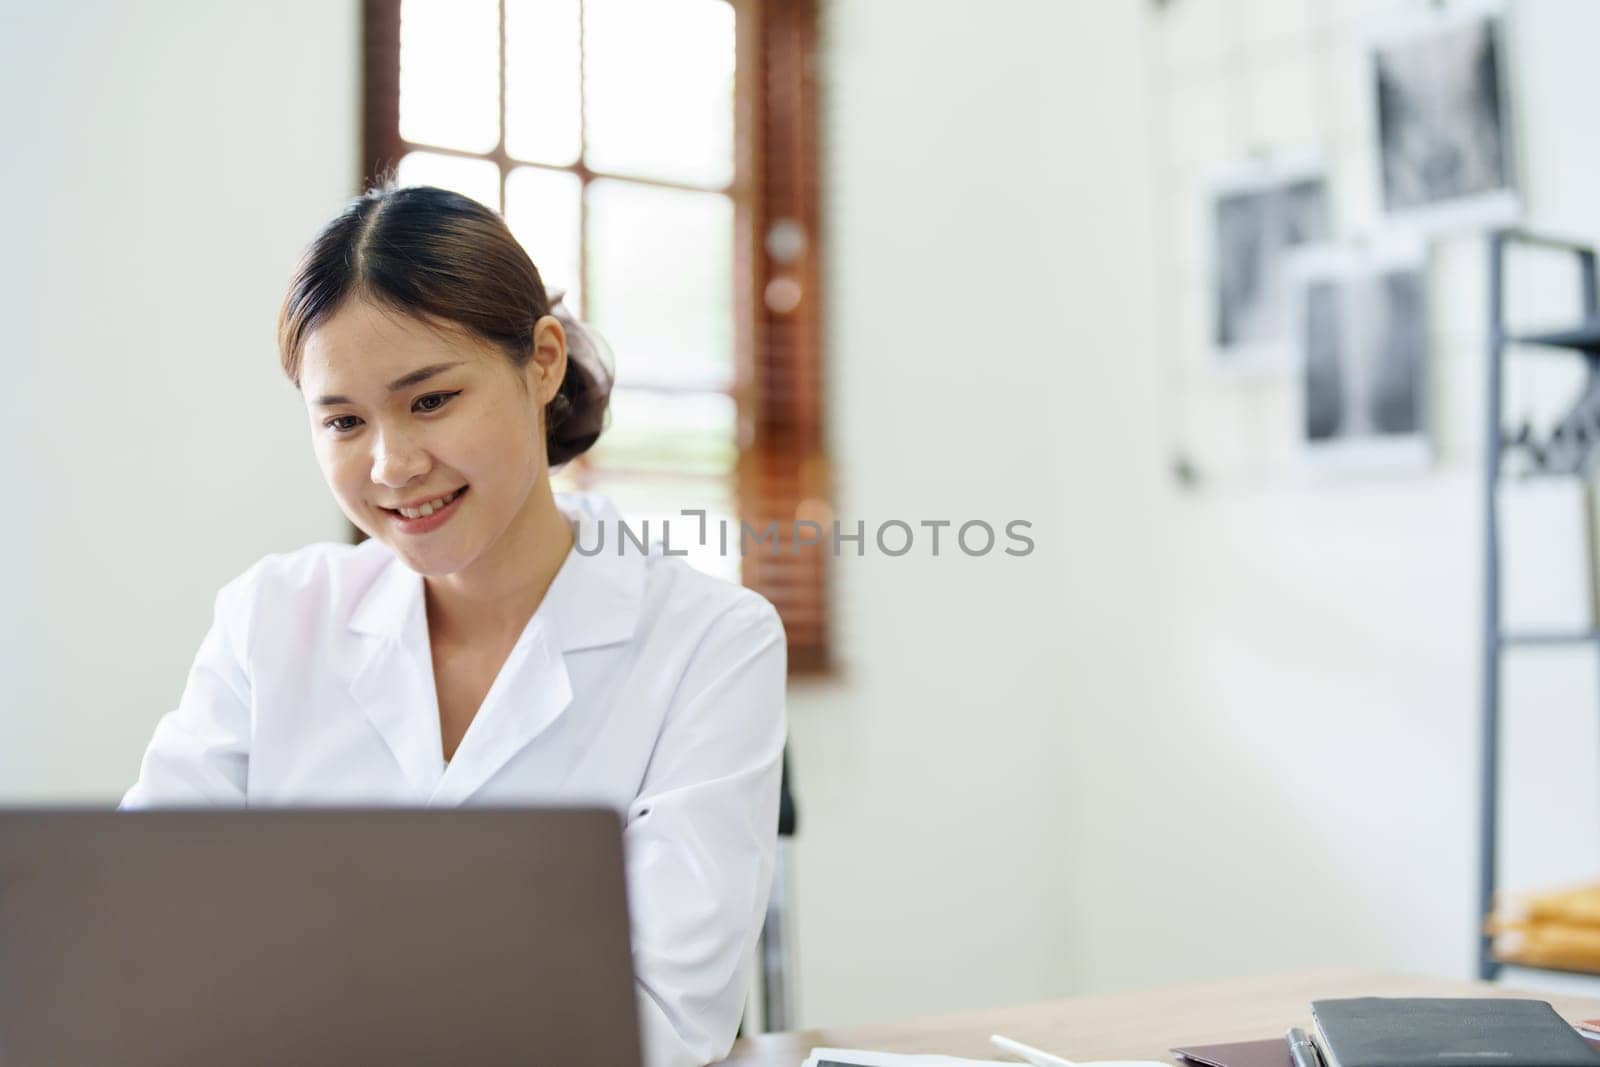 Portrait of an Asian doctor using a computer.